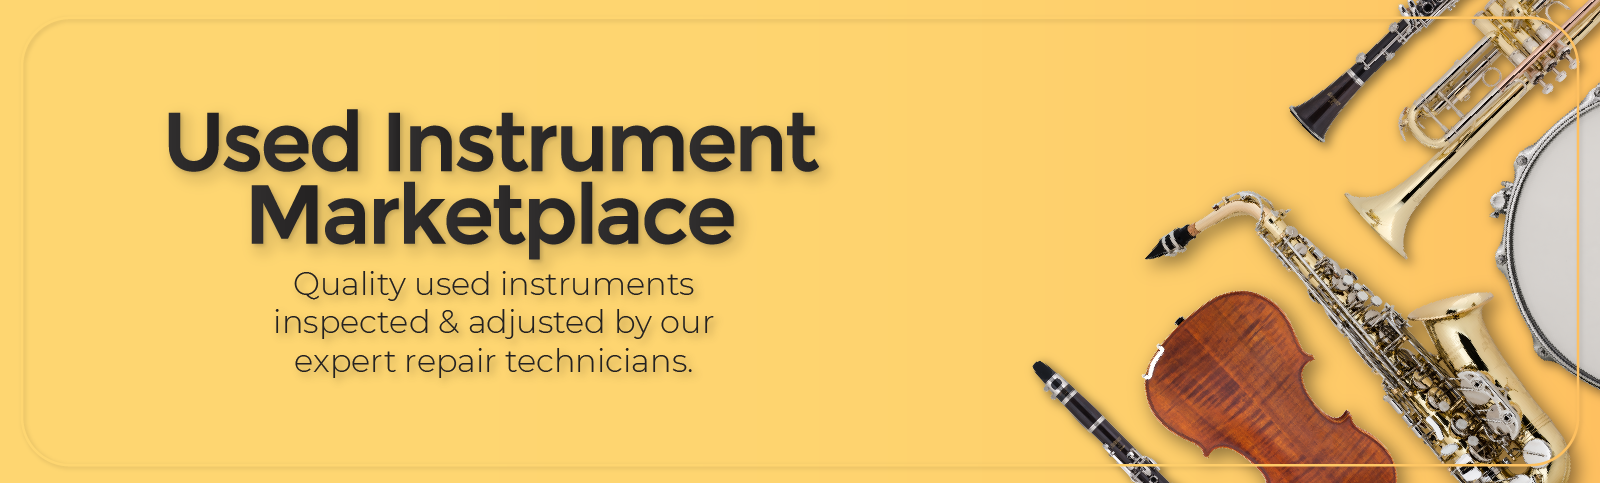 Introducing the New Used Instrument Marketplace